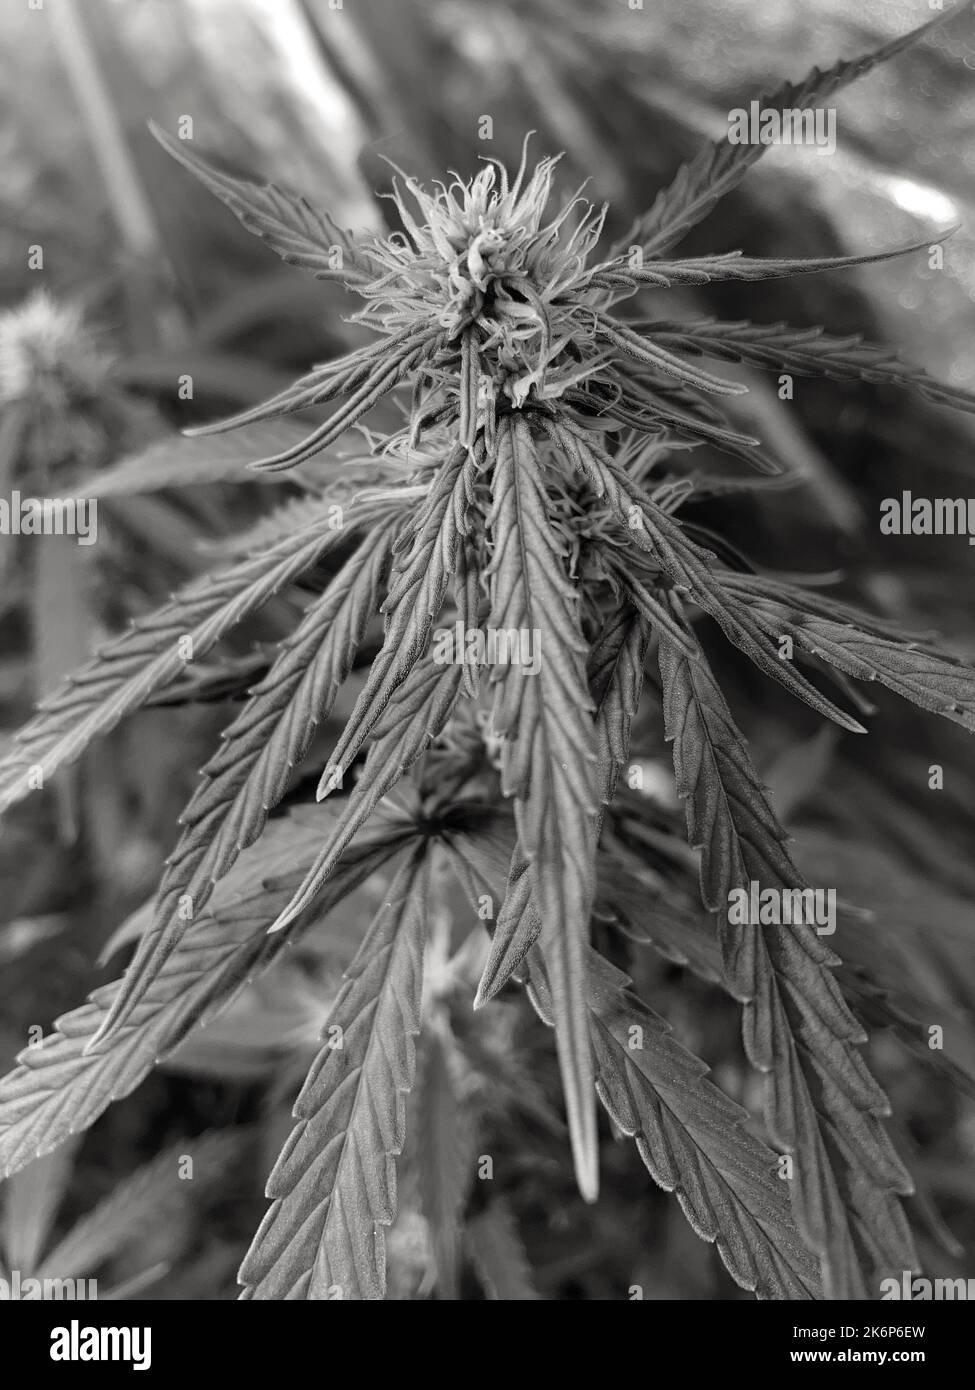 colour image of a female cannabis plant, Cannabis sativa, in a home grow tent Stock Photo